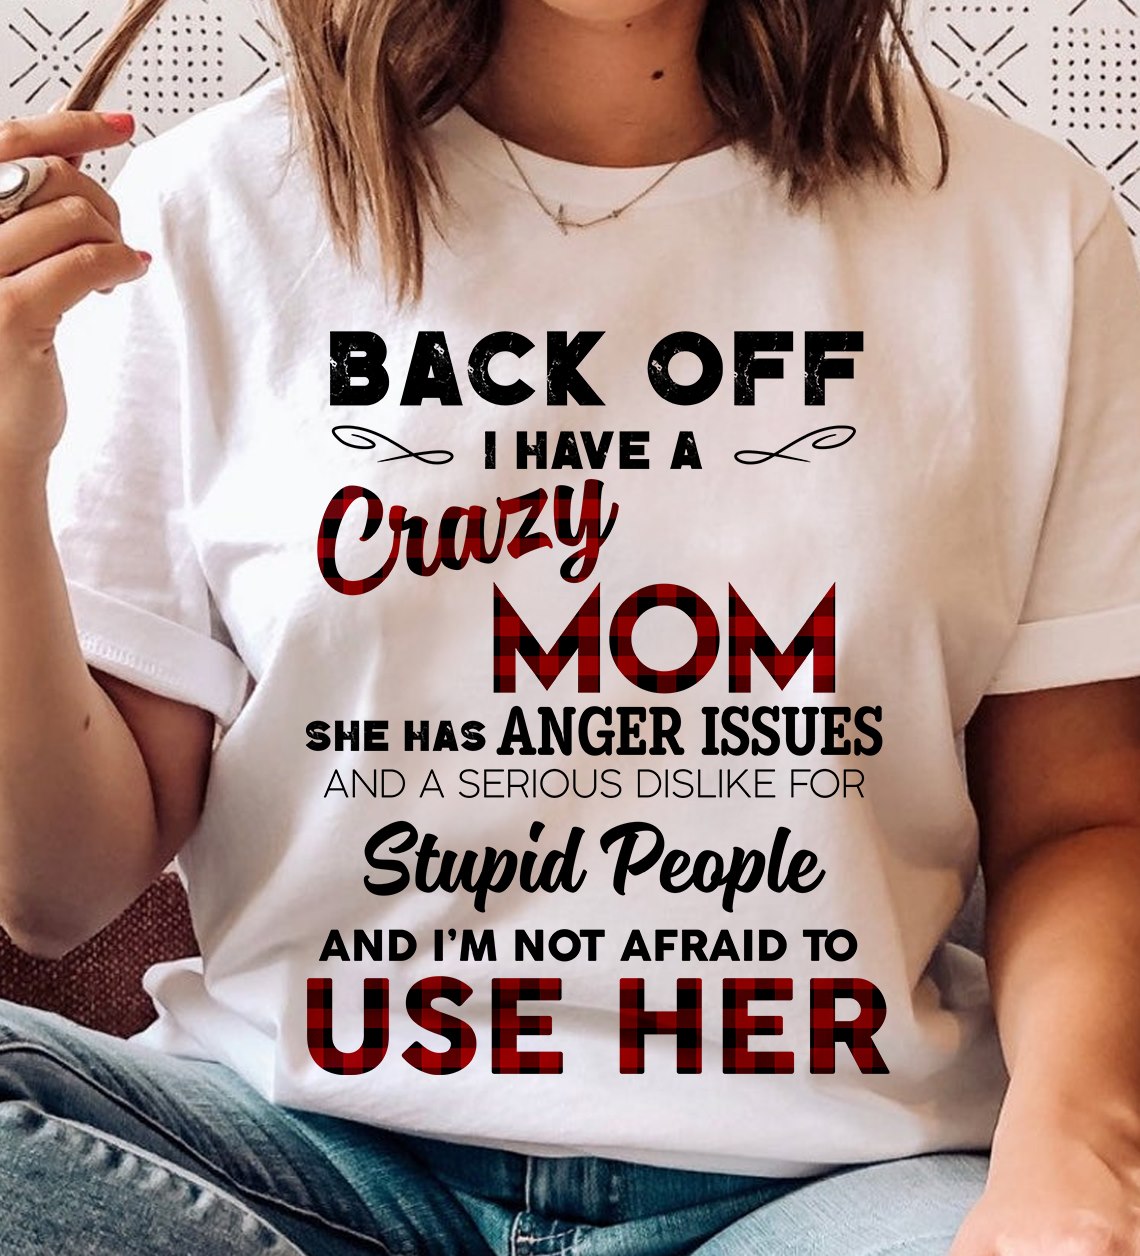 Back off I have crazy mom she has anger issues